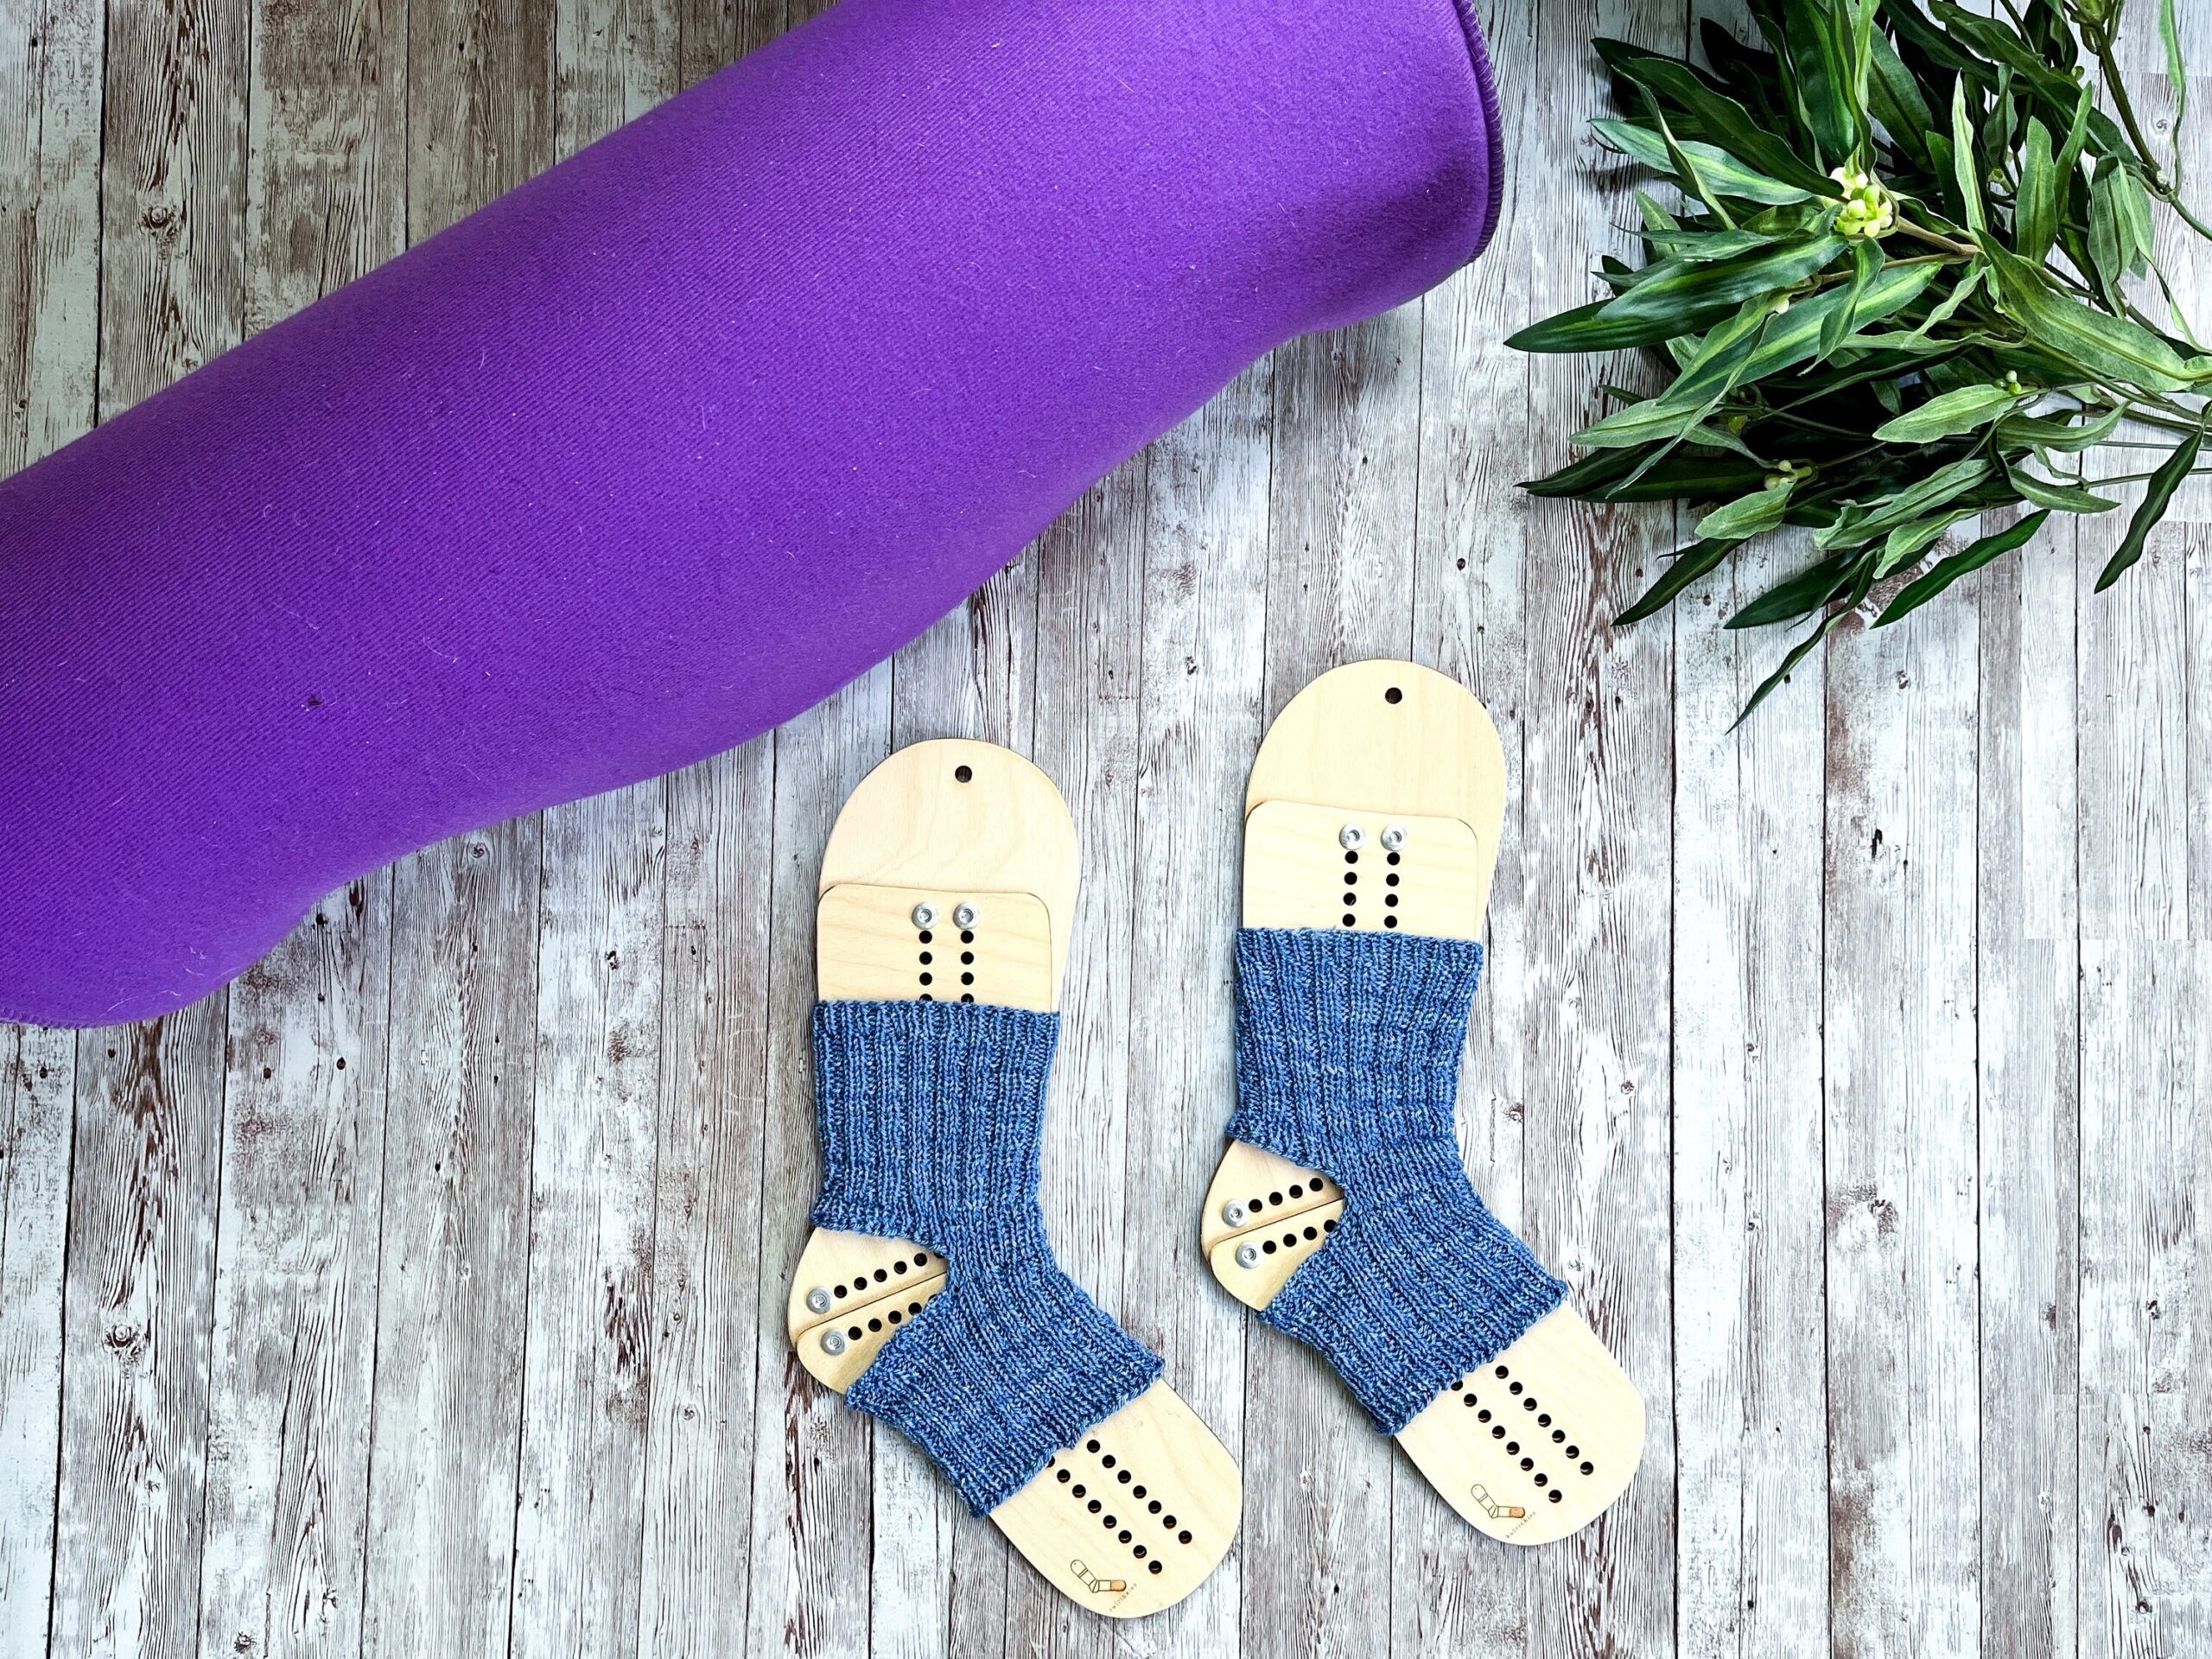 A pair of blue yoga socks on wooden sock blockers are surrounded by a rolled up yoga mat and greenery on a wood panel